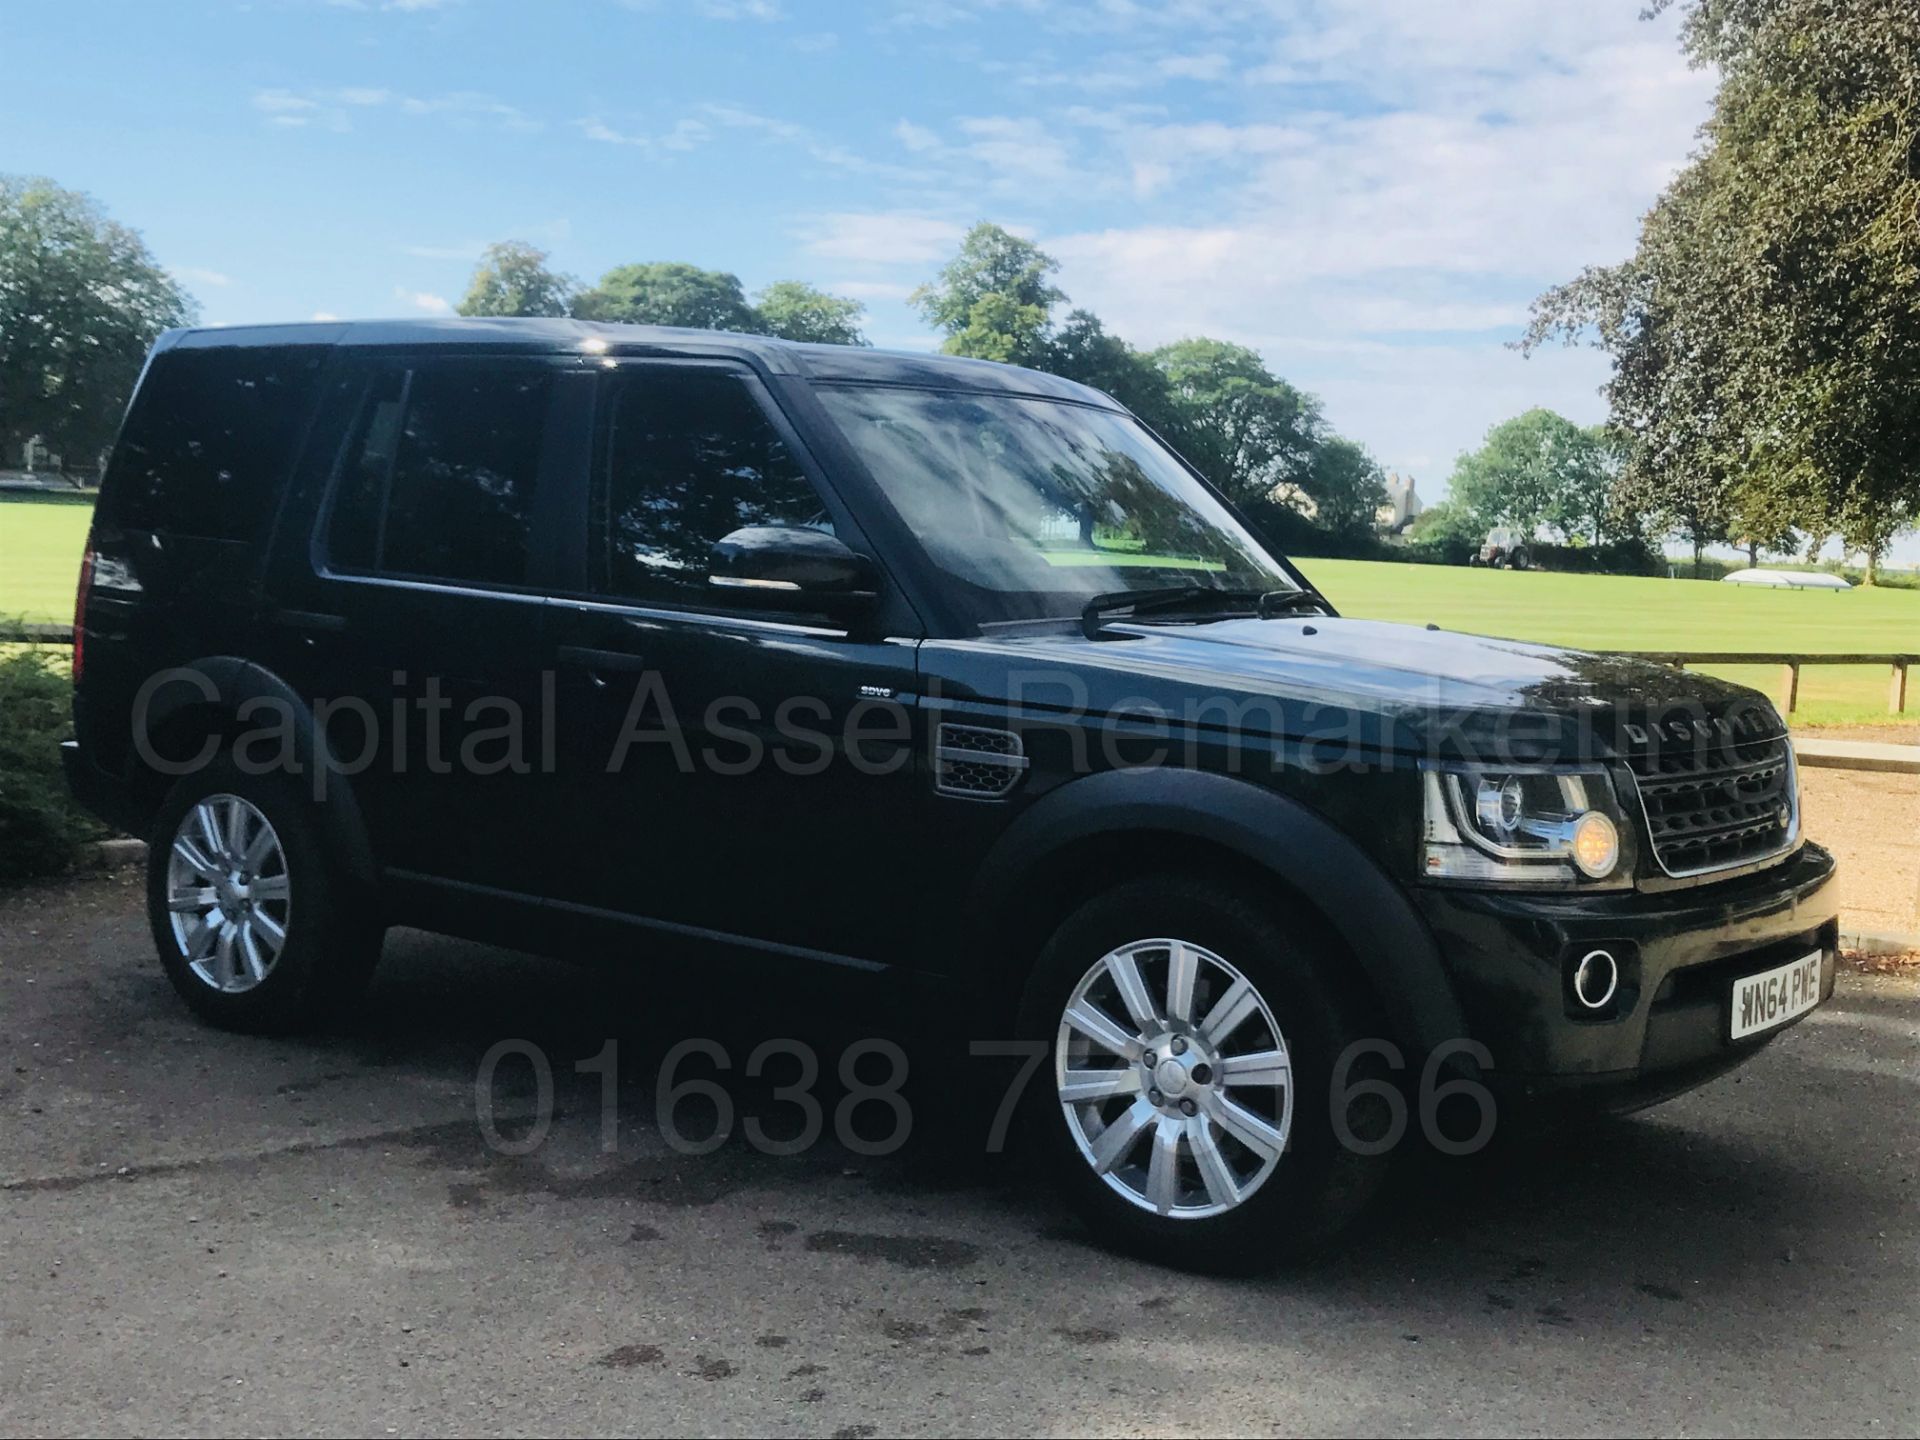 LAND ROVER DISCOVERY *XS EDITION* (2014) '3.0 SDV6 - 225 BHP- 8 SPEED AUTO' *MASSIVE SPEC* (1 OWNER)